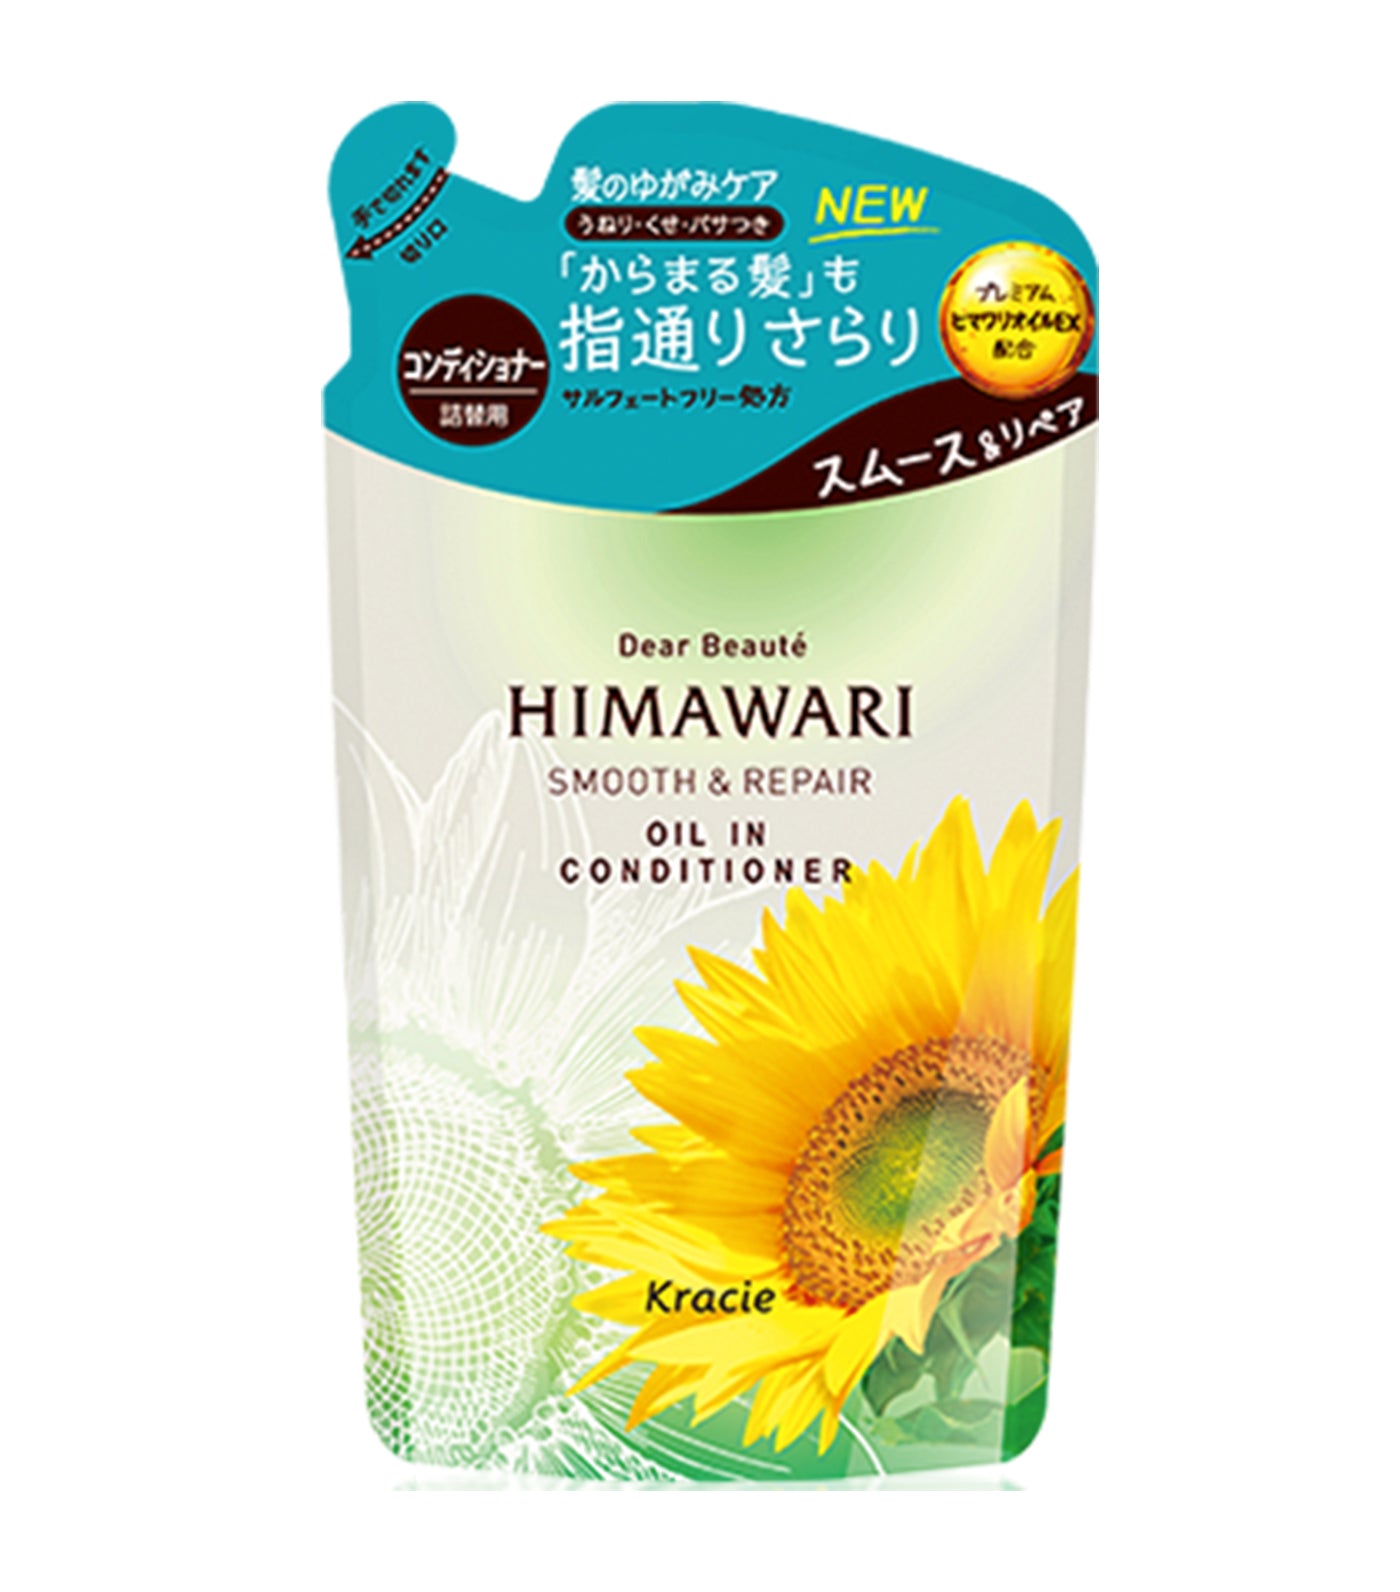 Dear Beaute Himawari Smooth and Repair Oil in Conditioner Refill Pack